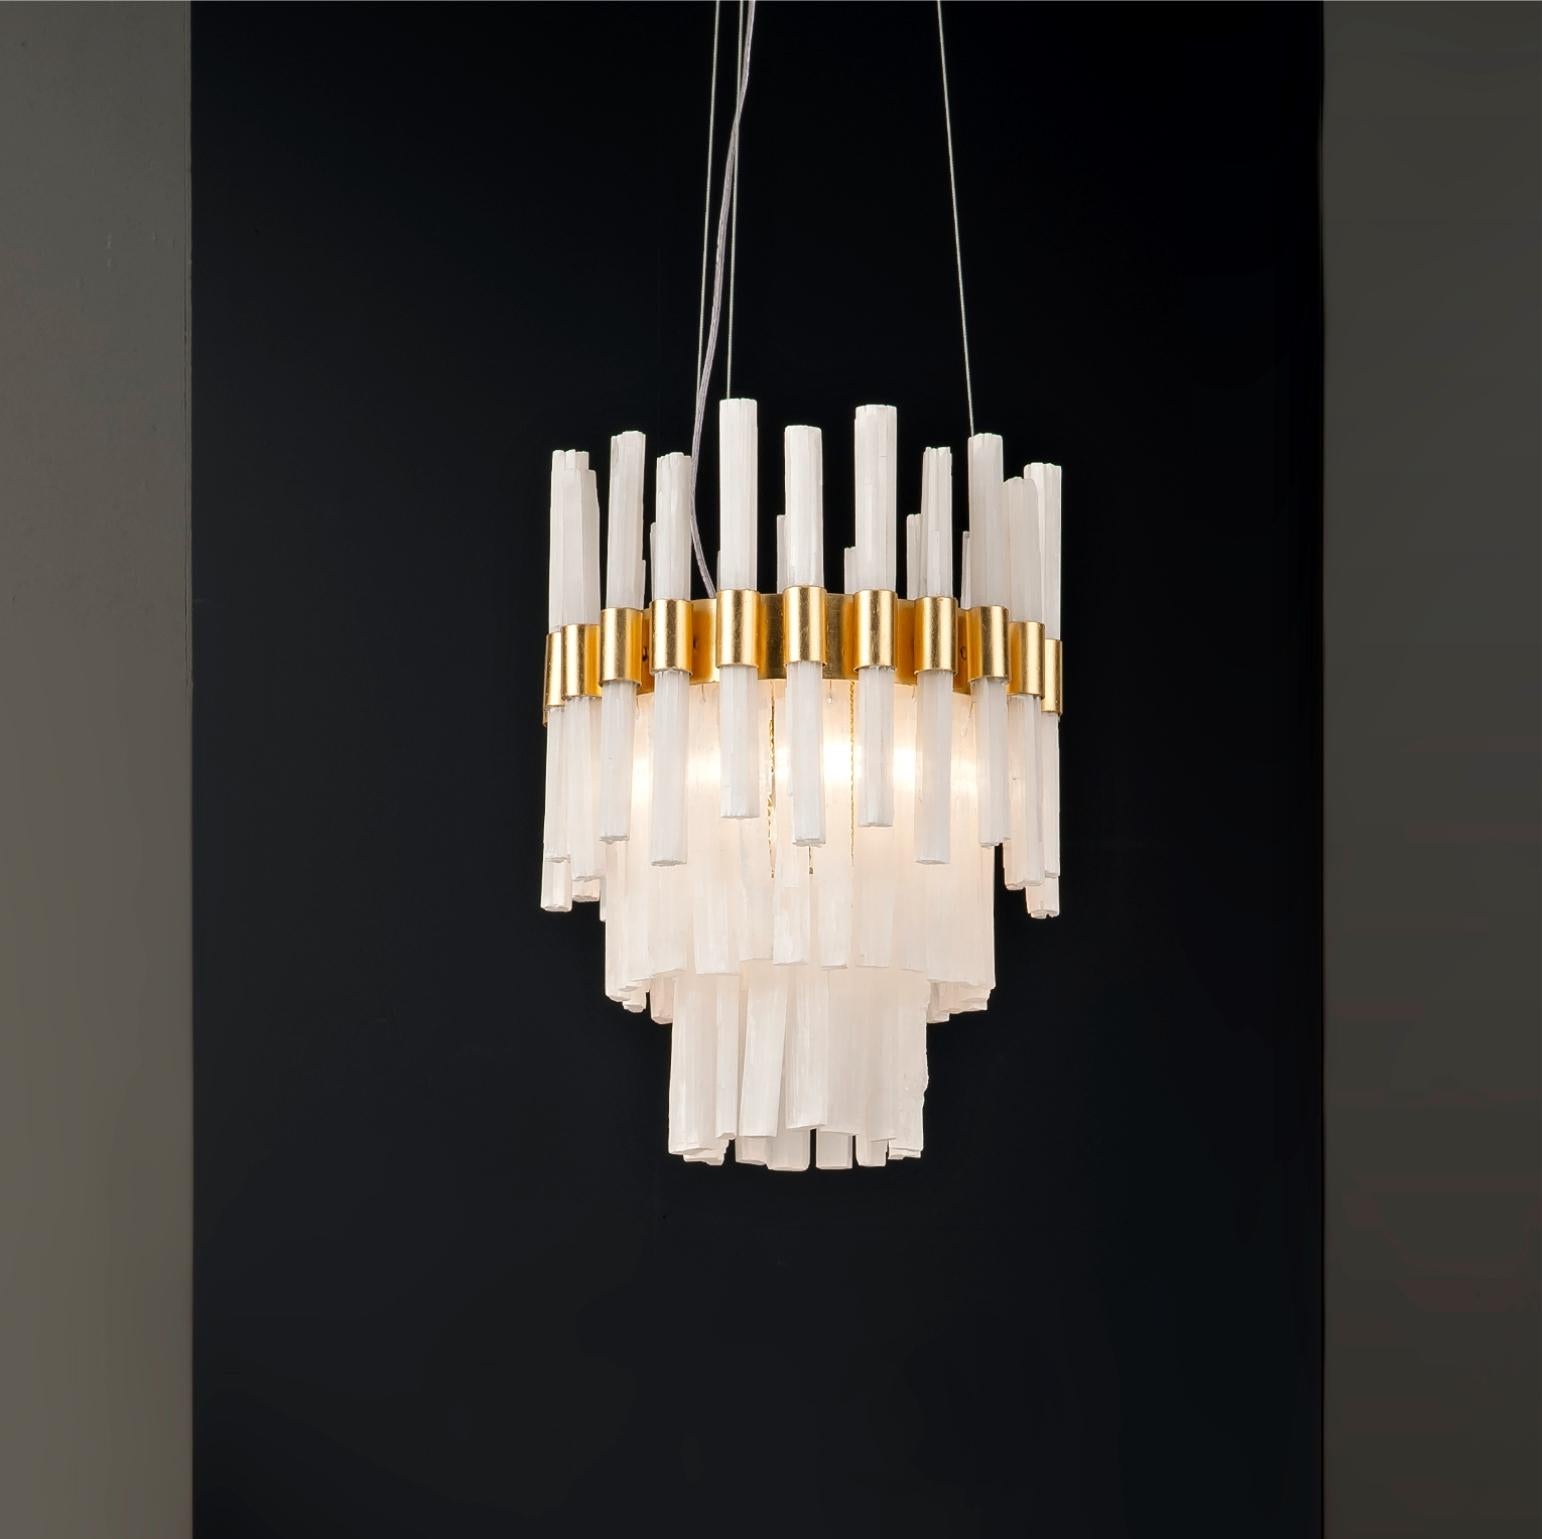 Small selenite chandelier lamp by Aver 
Dimensions: D 35 x H 45 cm 
Materials: Aluminum plated with gold leaf. Natural Selenite. 
Lighting: 03 x G9
Finish: Silver veneer, aged silver veneer, gold veneer, aged gold veneer, copper veneer, aged copper